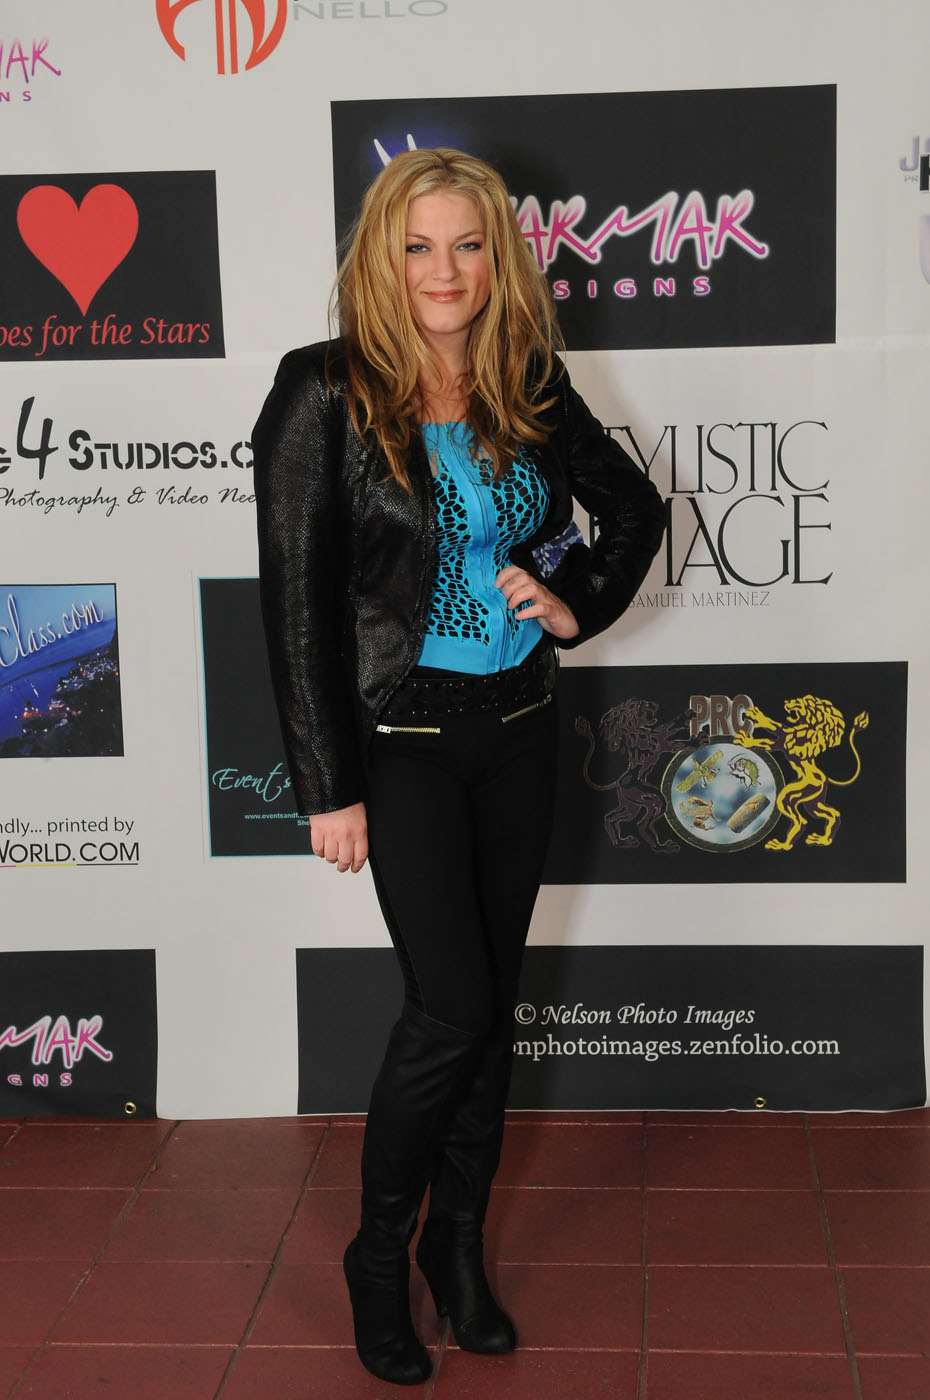 Stefanie Kleine at the Indulge Fashion Show Charity event - 2011 Collection